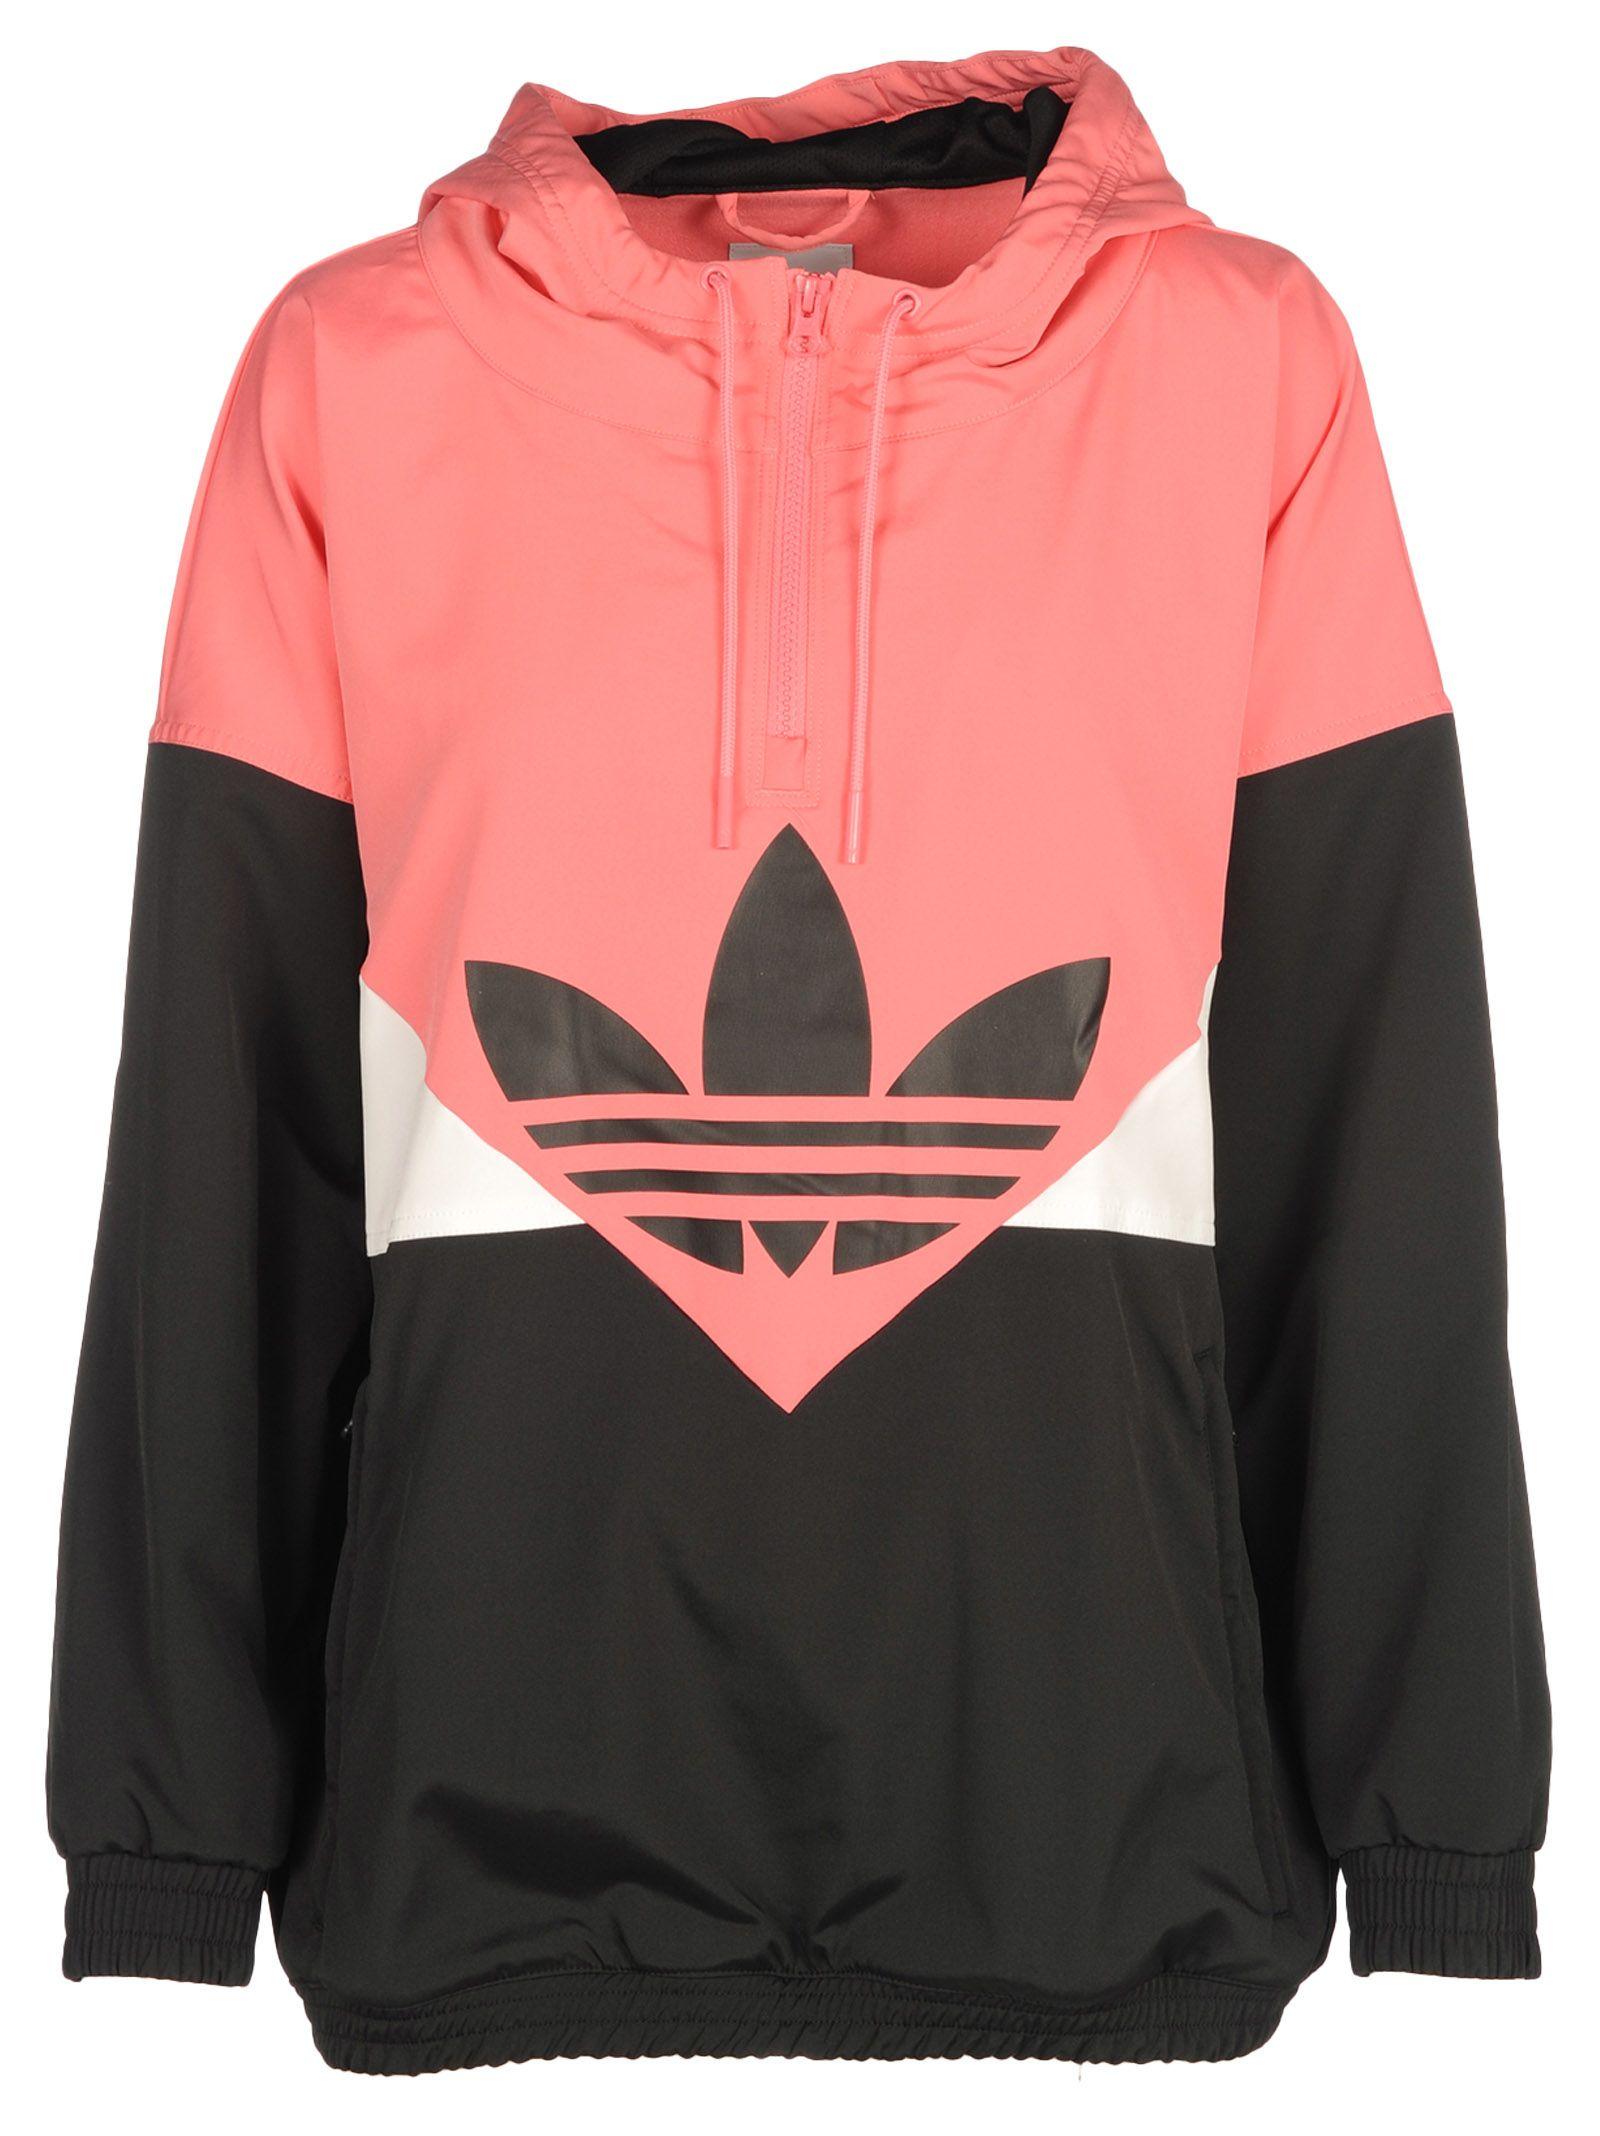 pink and black adidas outfit